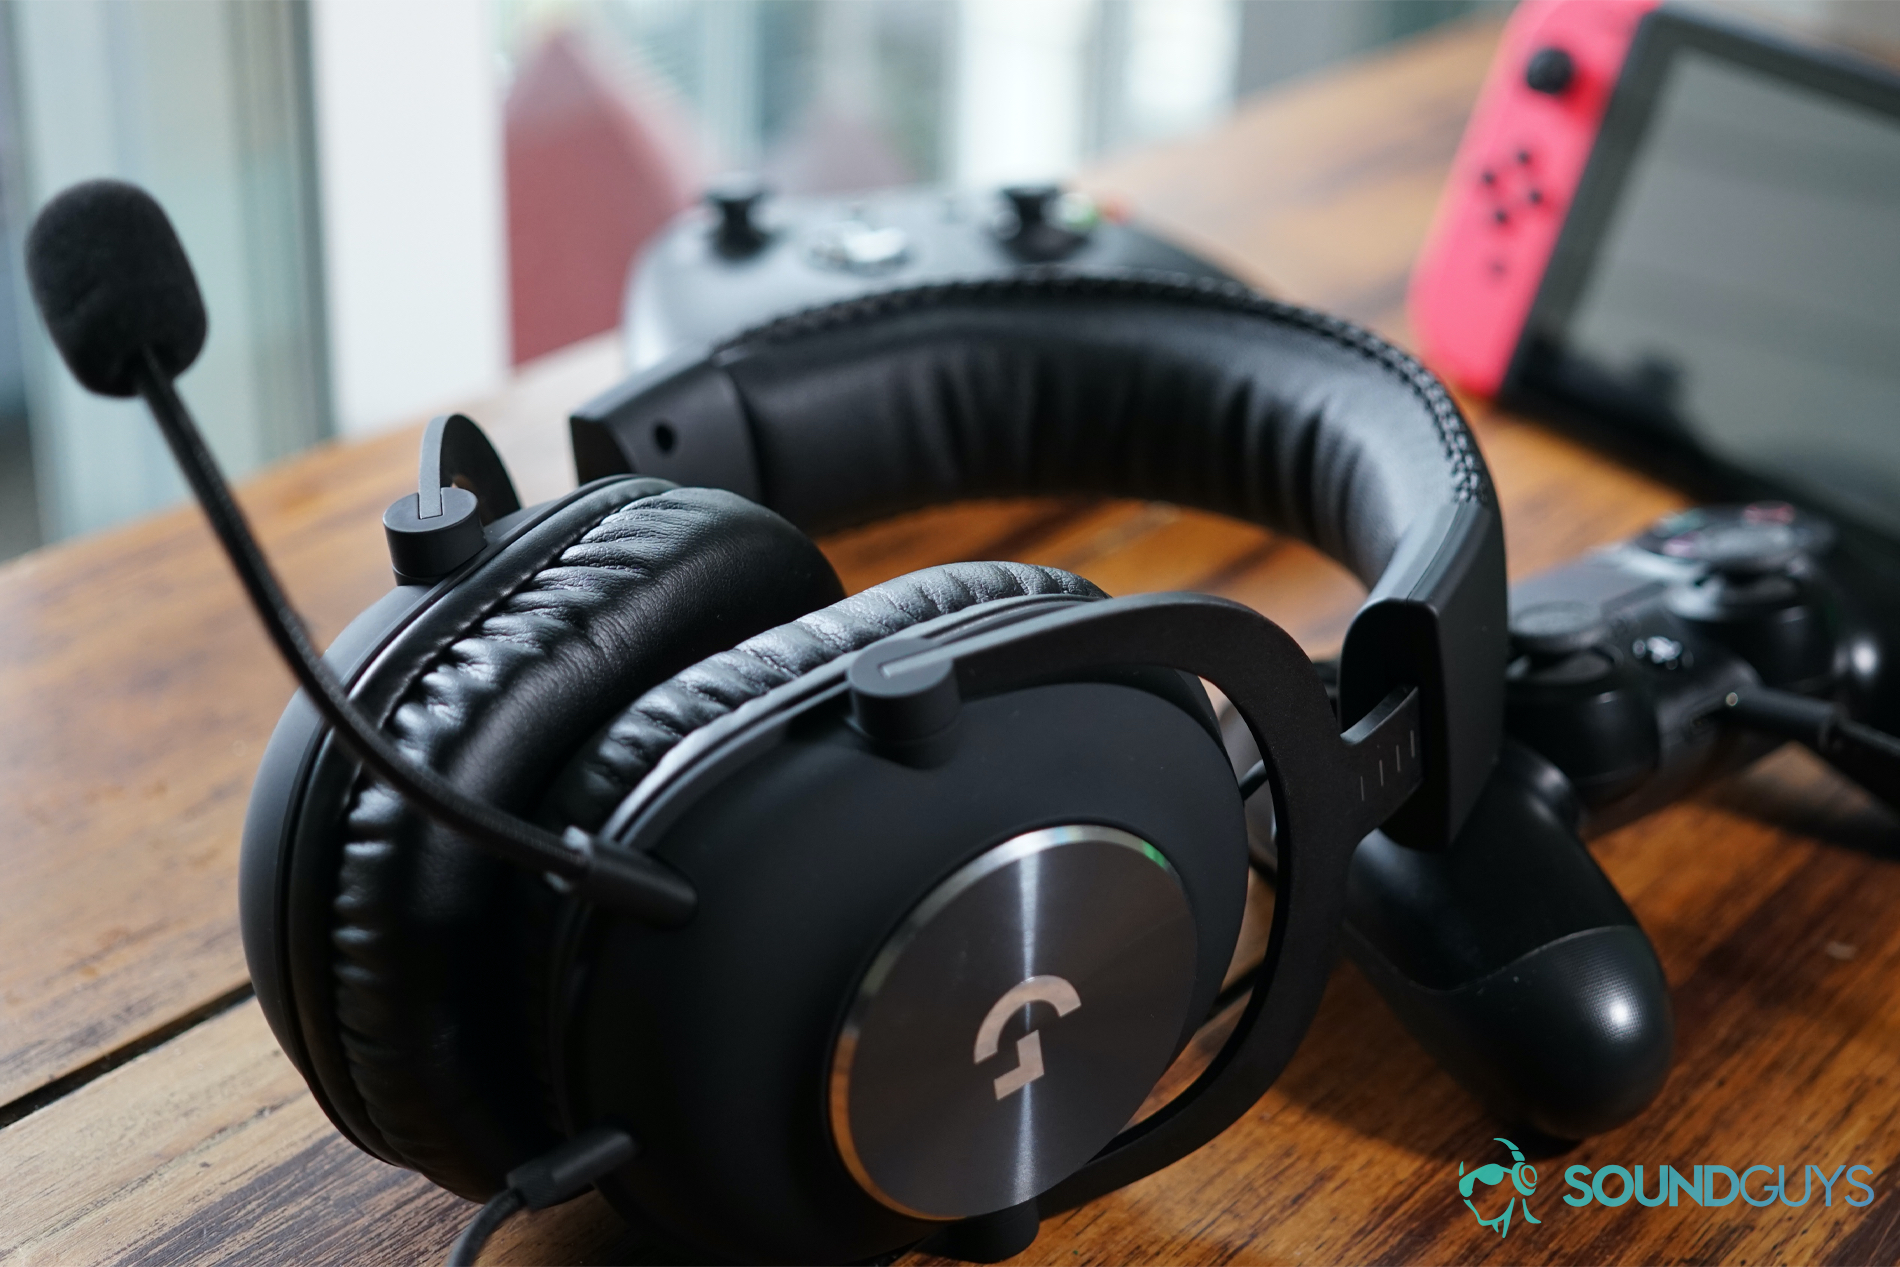 The Logitech G Pro X gaming headset leaning on a Playstation 4 controller, with a Nintendo Switch and an Xbox One controller in the background.